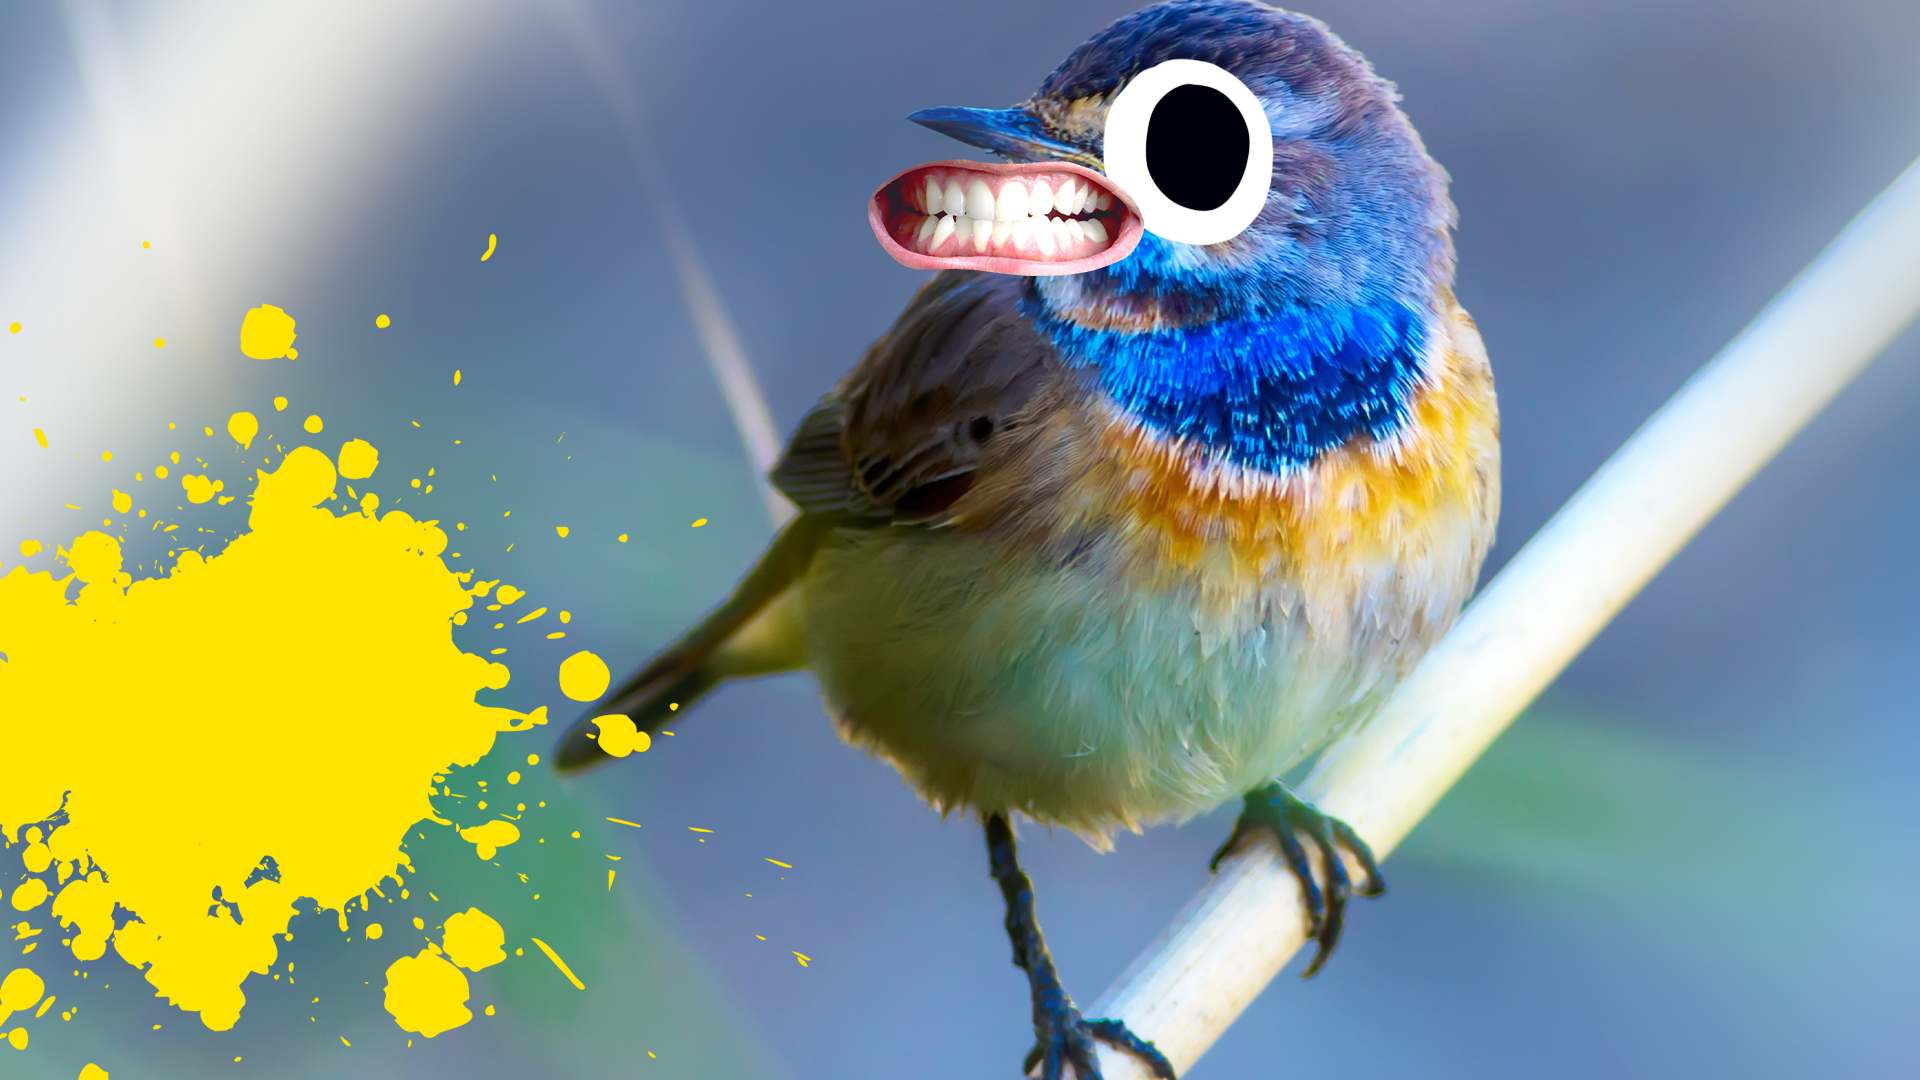 Bird with goofy face and yellow splat